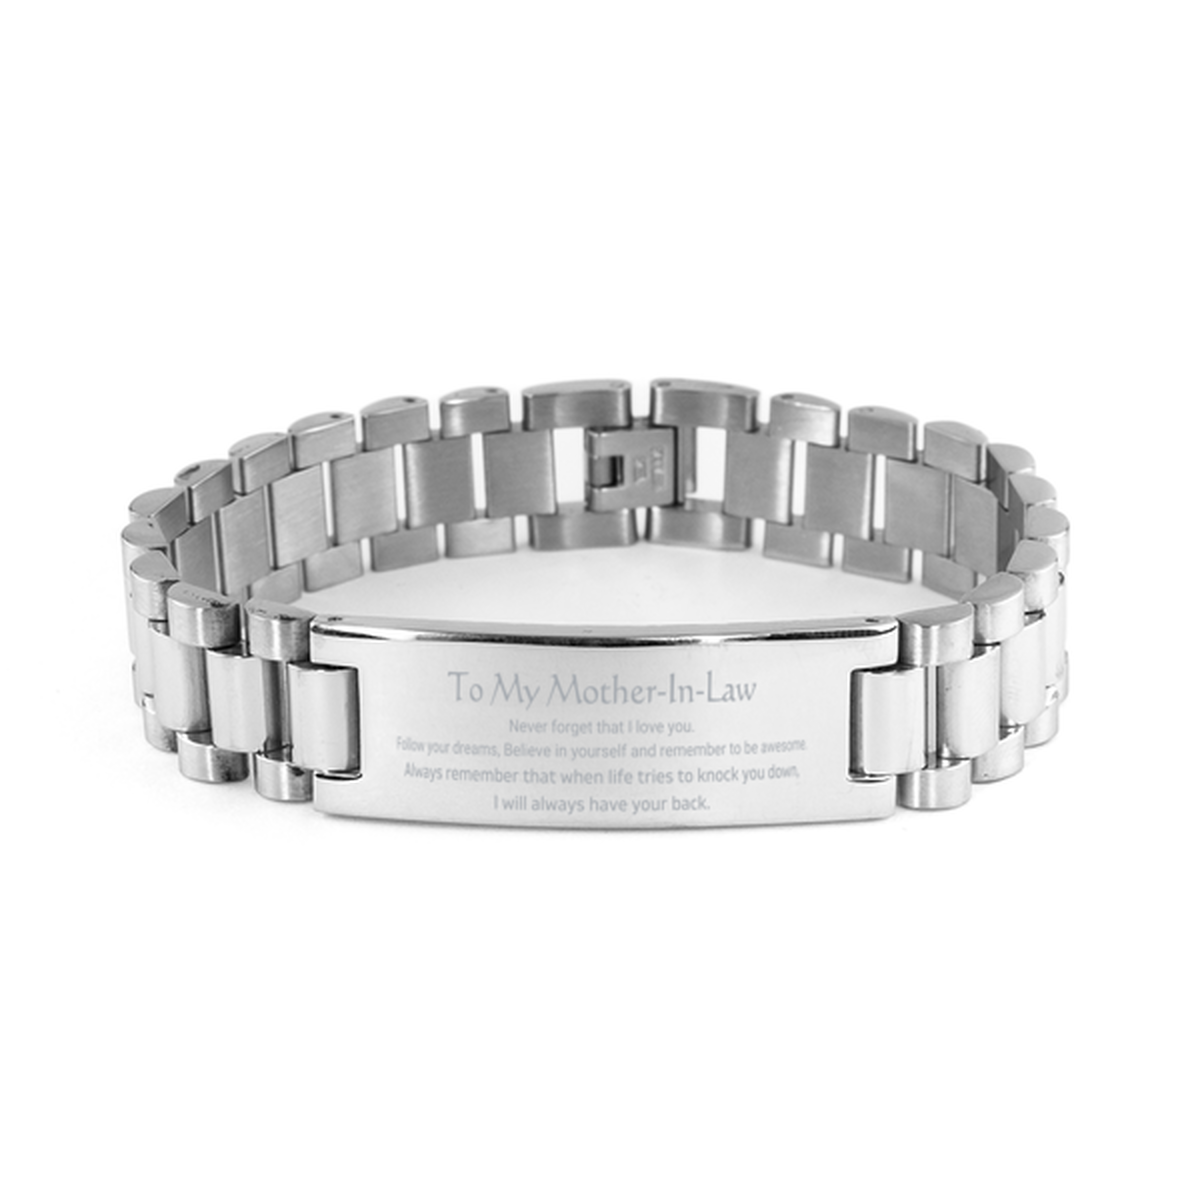 Inspirational Gifts for Mother-In-Law, Follow your dreams, Believe in yourself, Mother-In-Law Ladder Stainless Steel Bracelet, Birthday Christmas Unique Gifts For Mother-In-Law